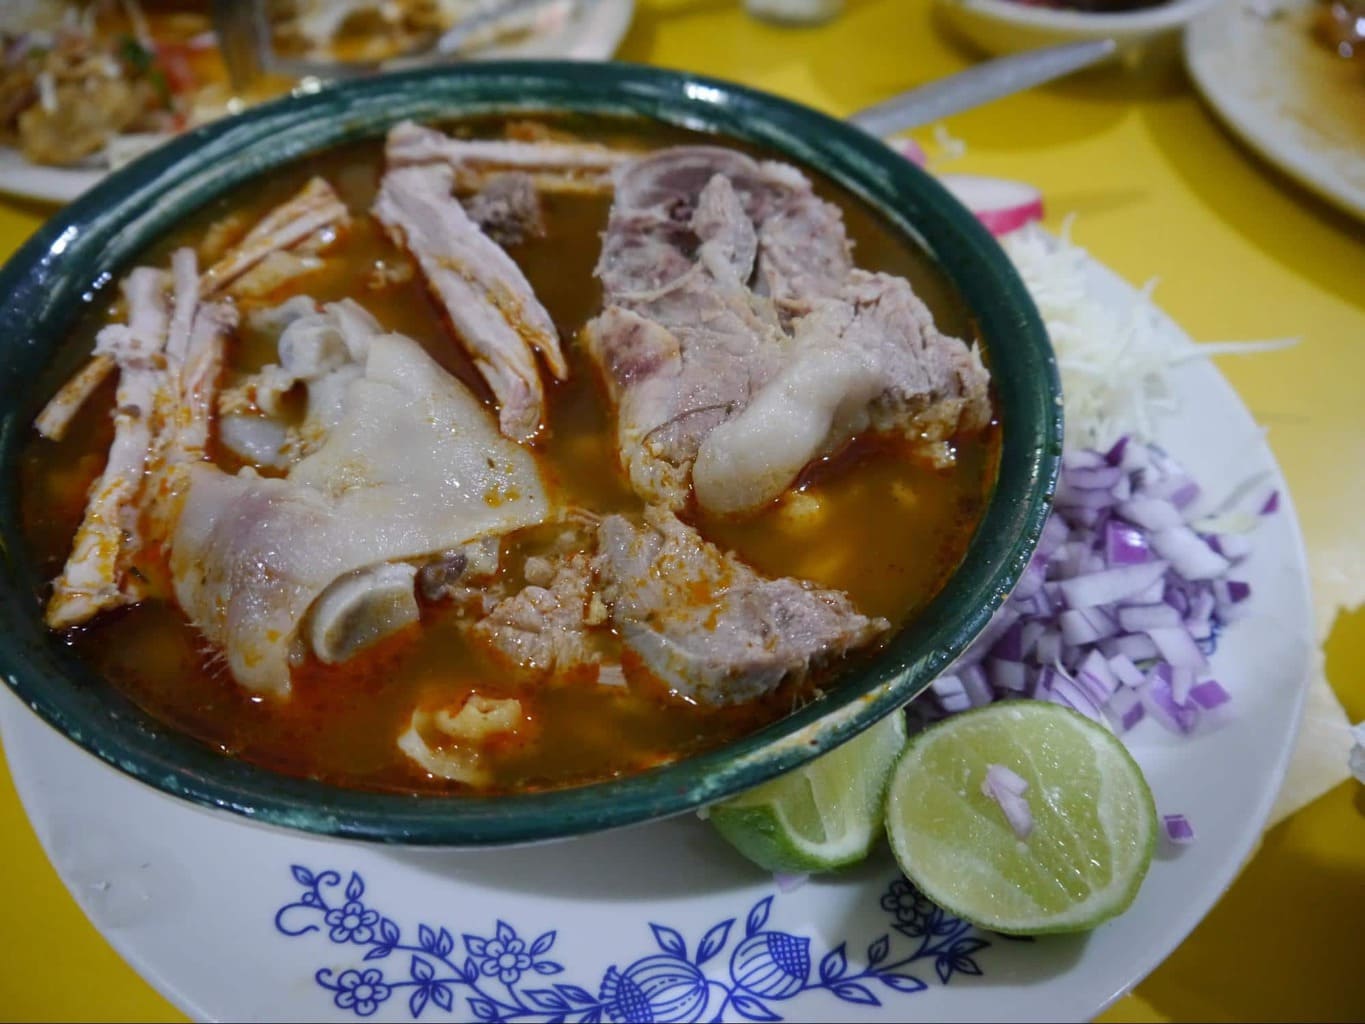 Pozole is a a Mexican soup-stew with whole corn grains